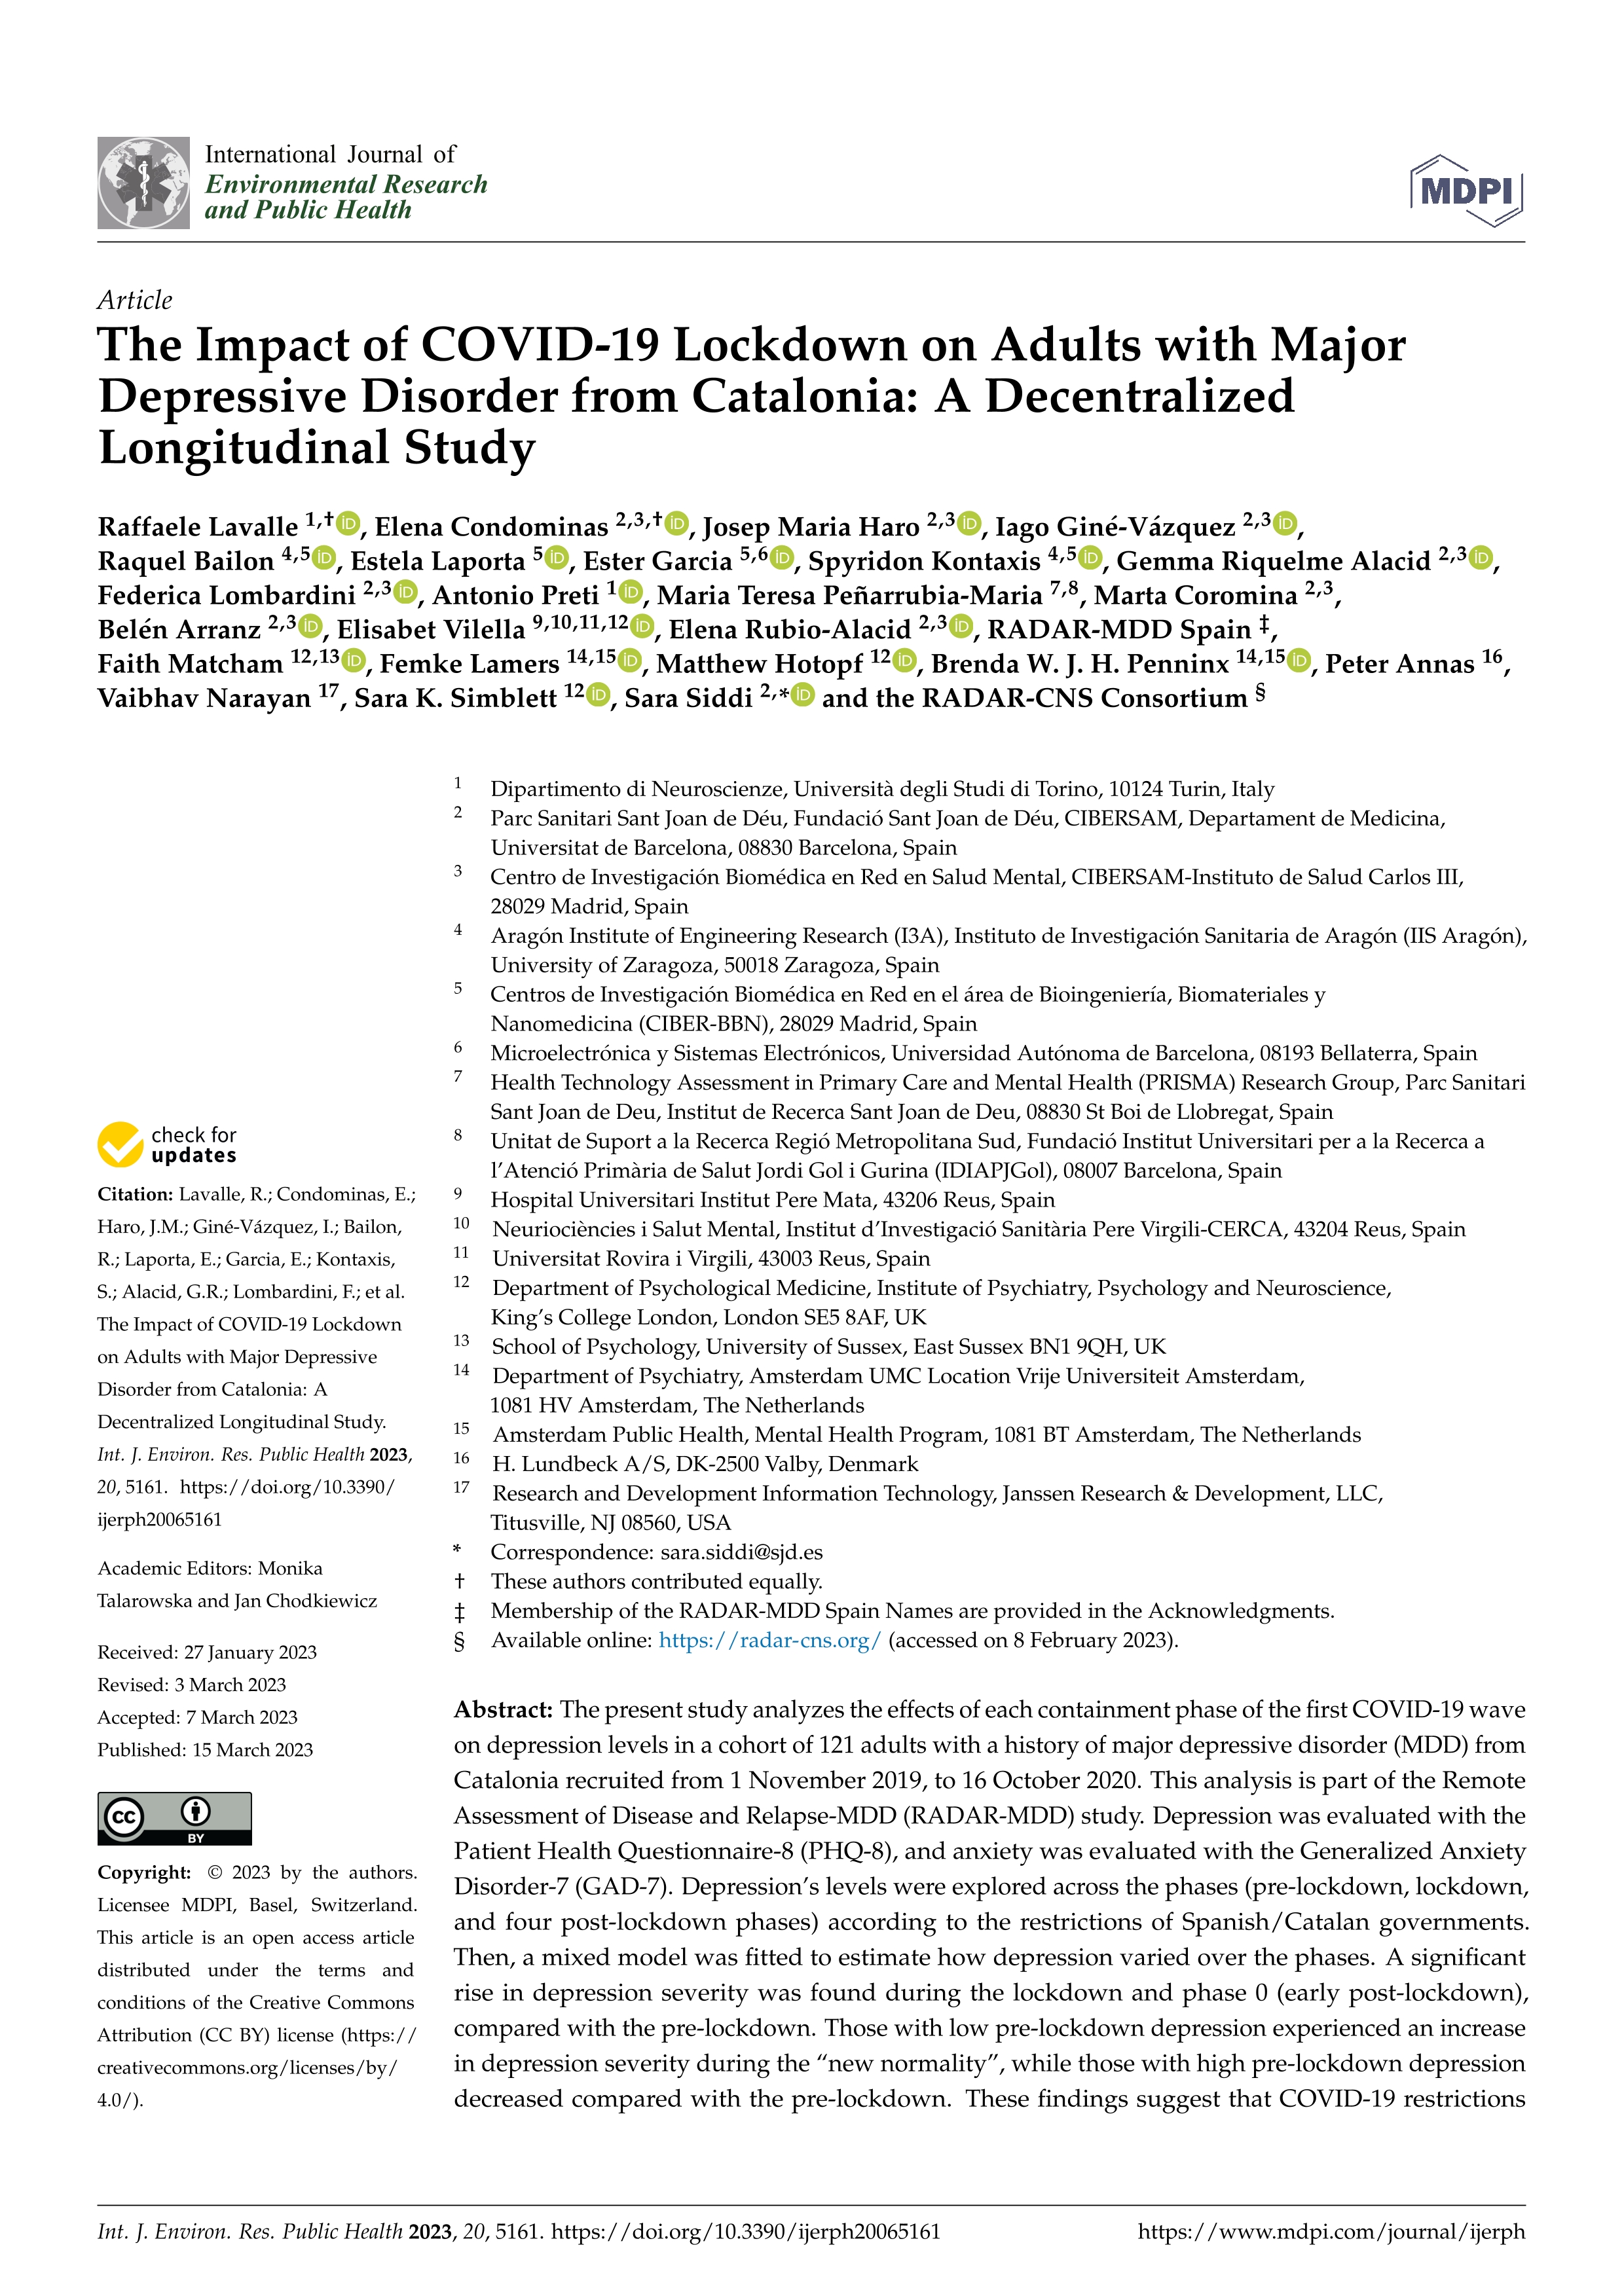 The impact of COVID-19 lockdown on adults with major depressive disorder from Catalonia: a decentralized longitudinal study